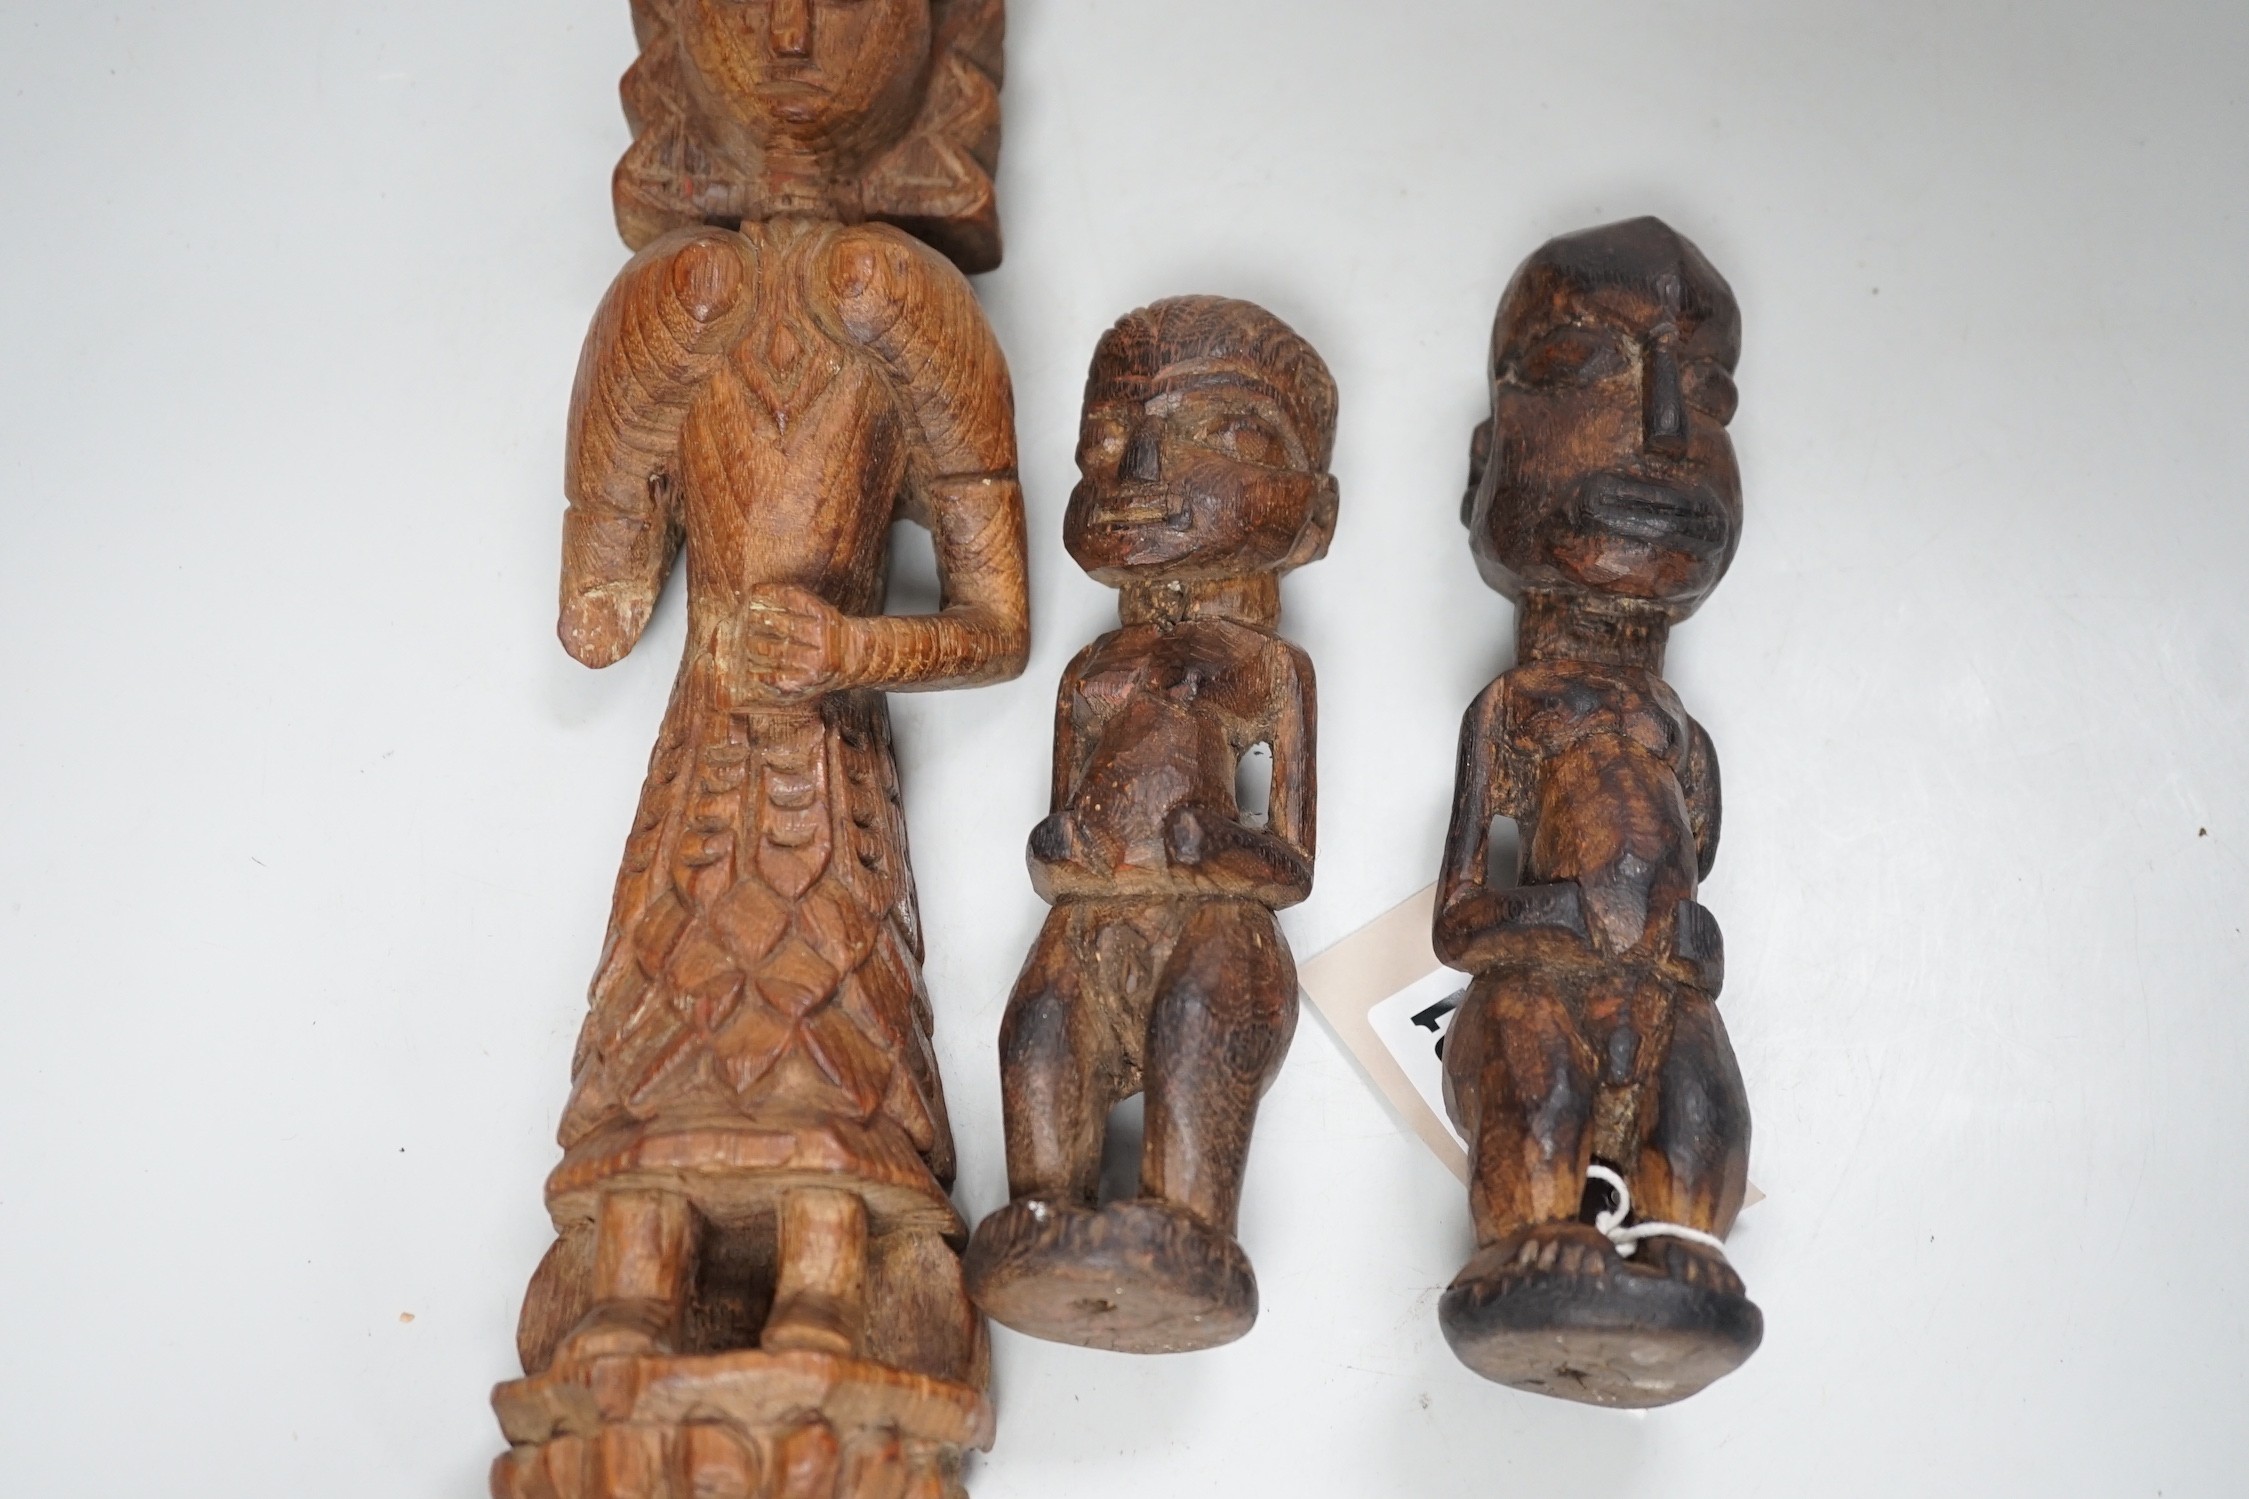 A carved teak terminal figure and two African tribal figures, largest 32cm long